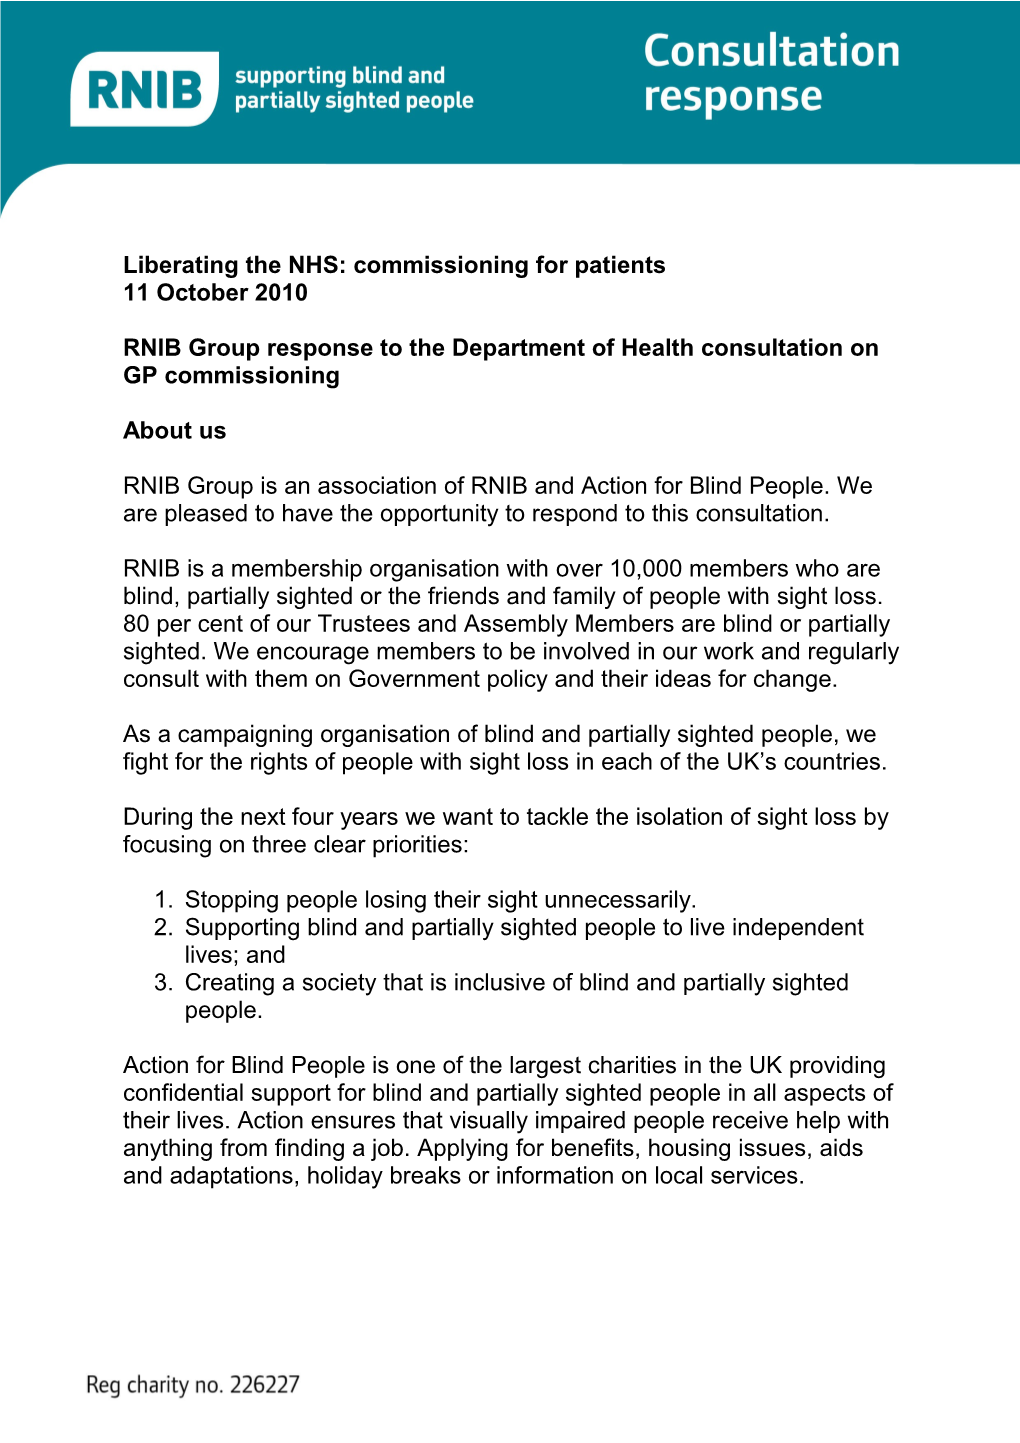 Liberating the NHS: Commissioning for Patients